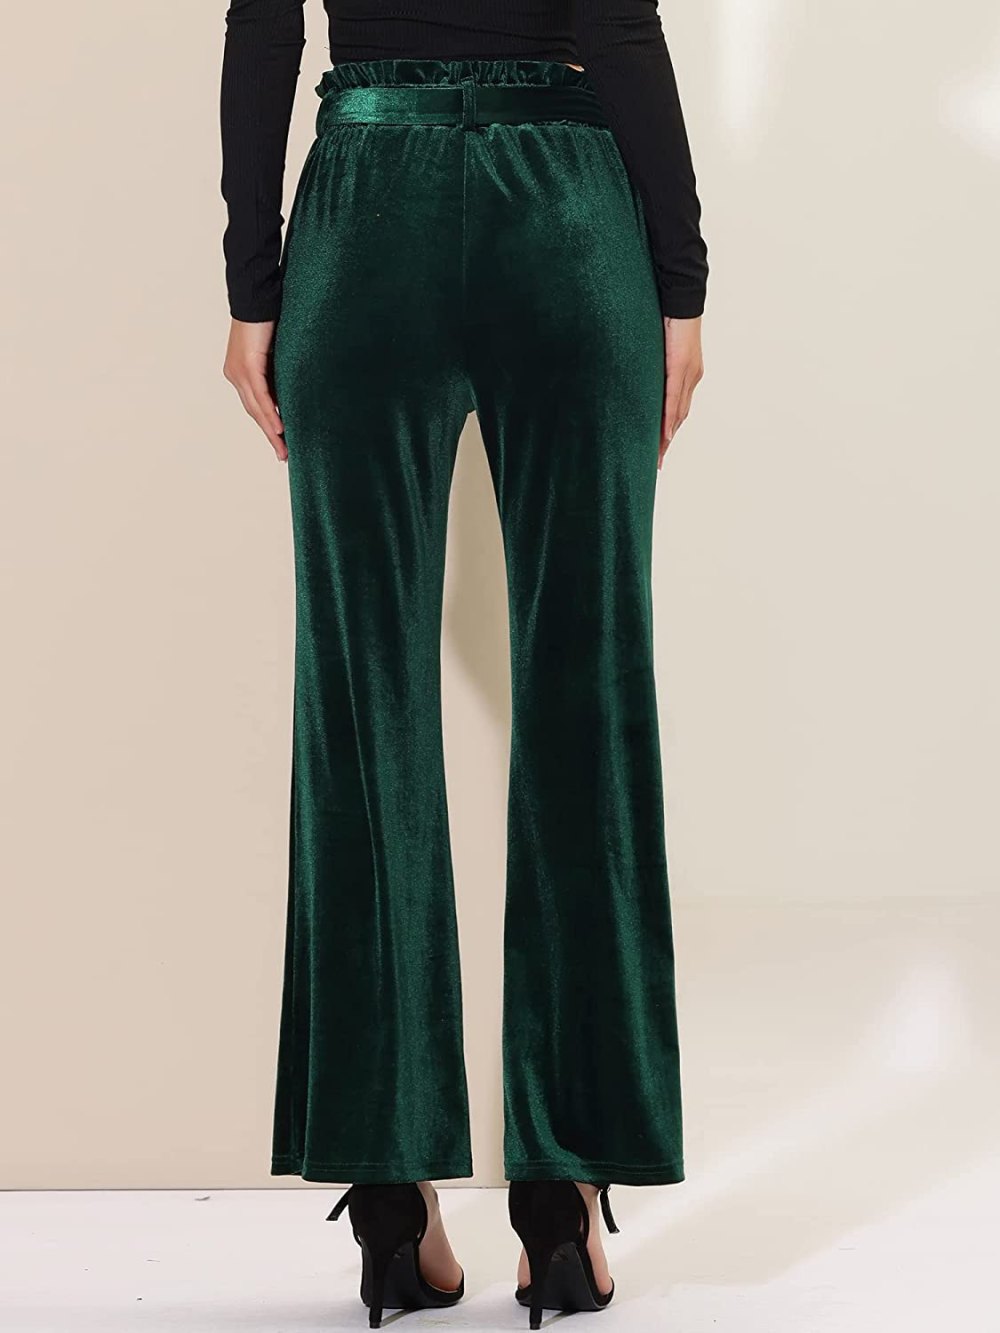 Allegra K Velvet Pants Are Perfect for Holiday Looks This Season | Us ...